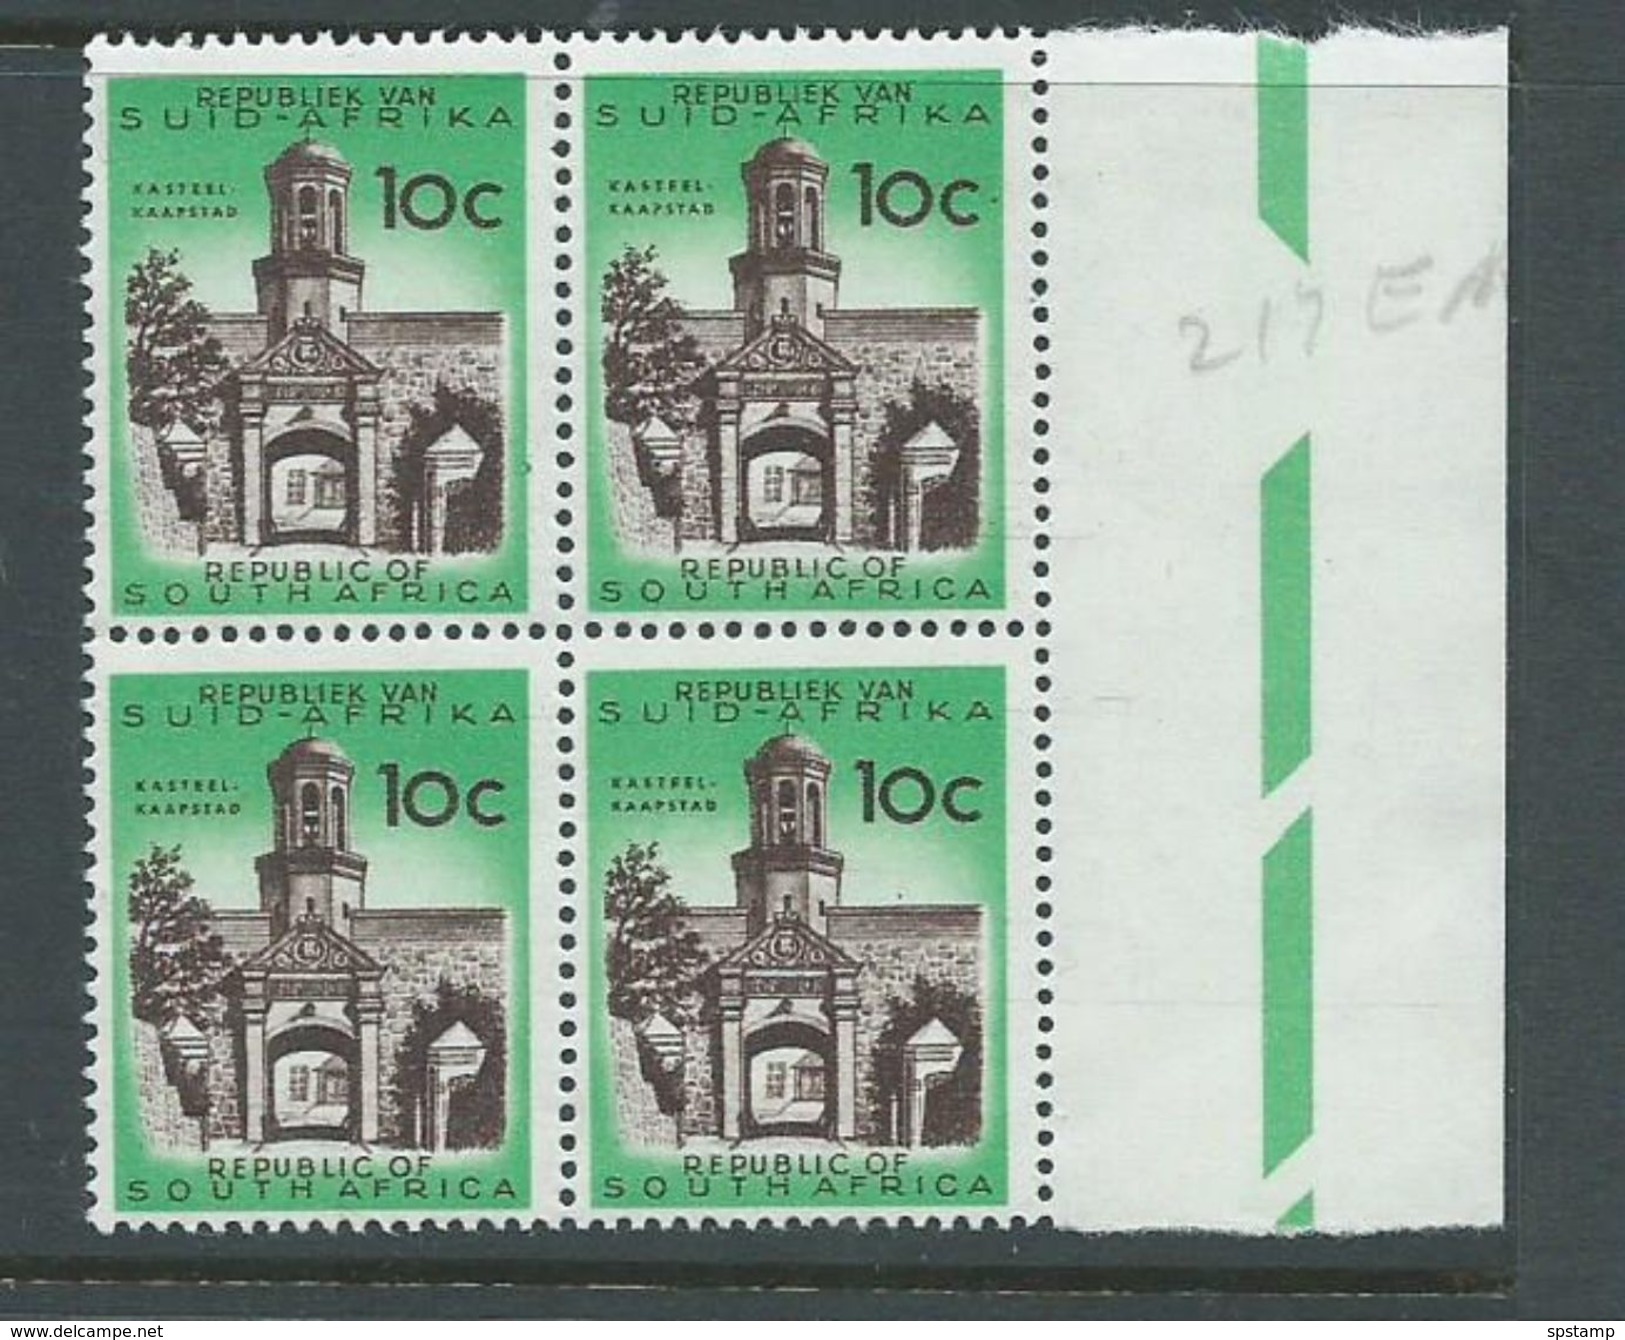 South Africa 1961 - 1963 No Watermark Definitives 10c Capetown Castle Block Of 4 Marginal MNH - Unused Stamps